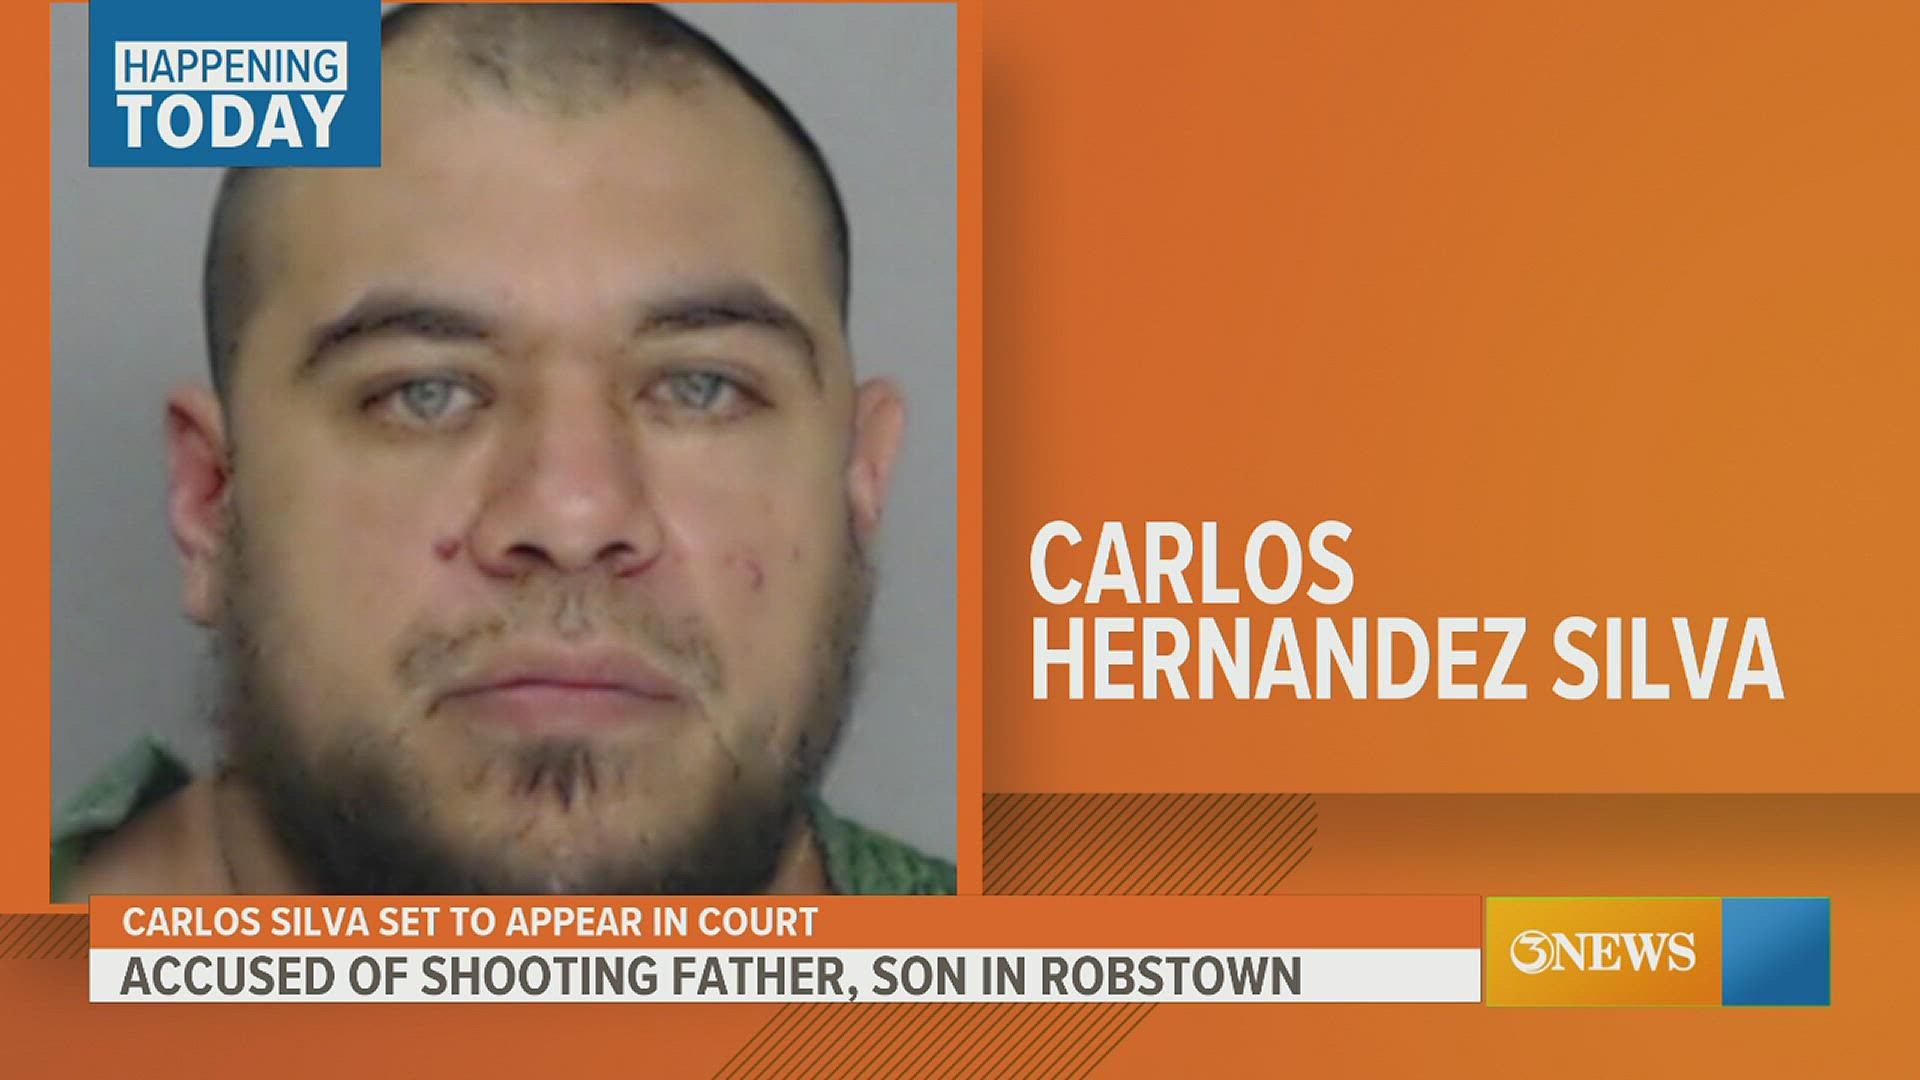 Carlos Hernandez Silva will appear in court and will face murder and aggravated assault charges.